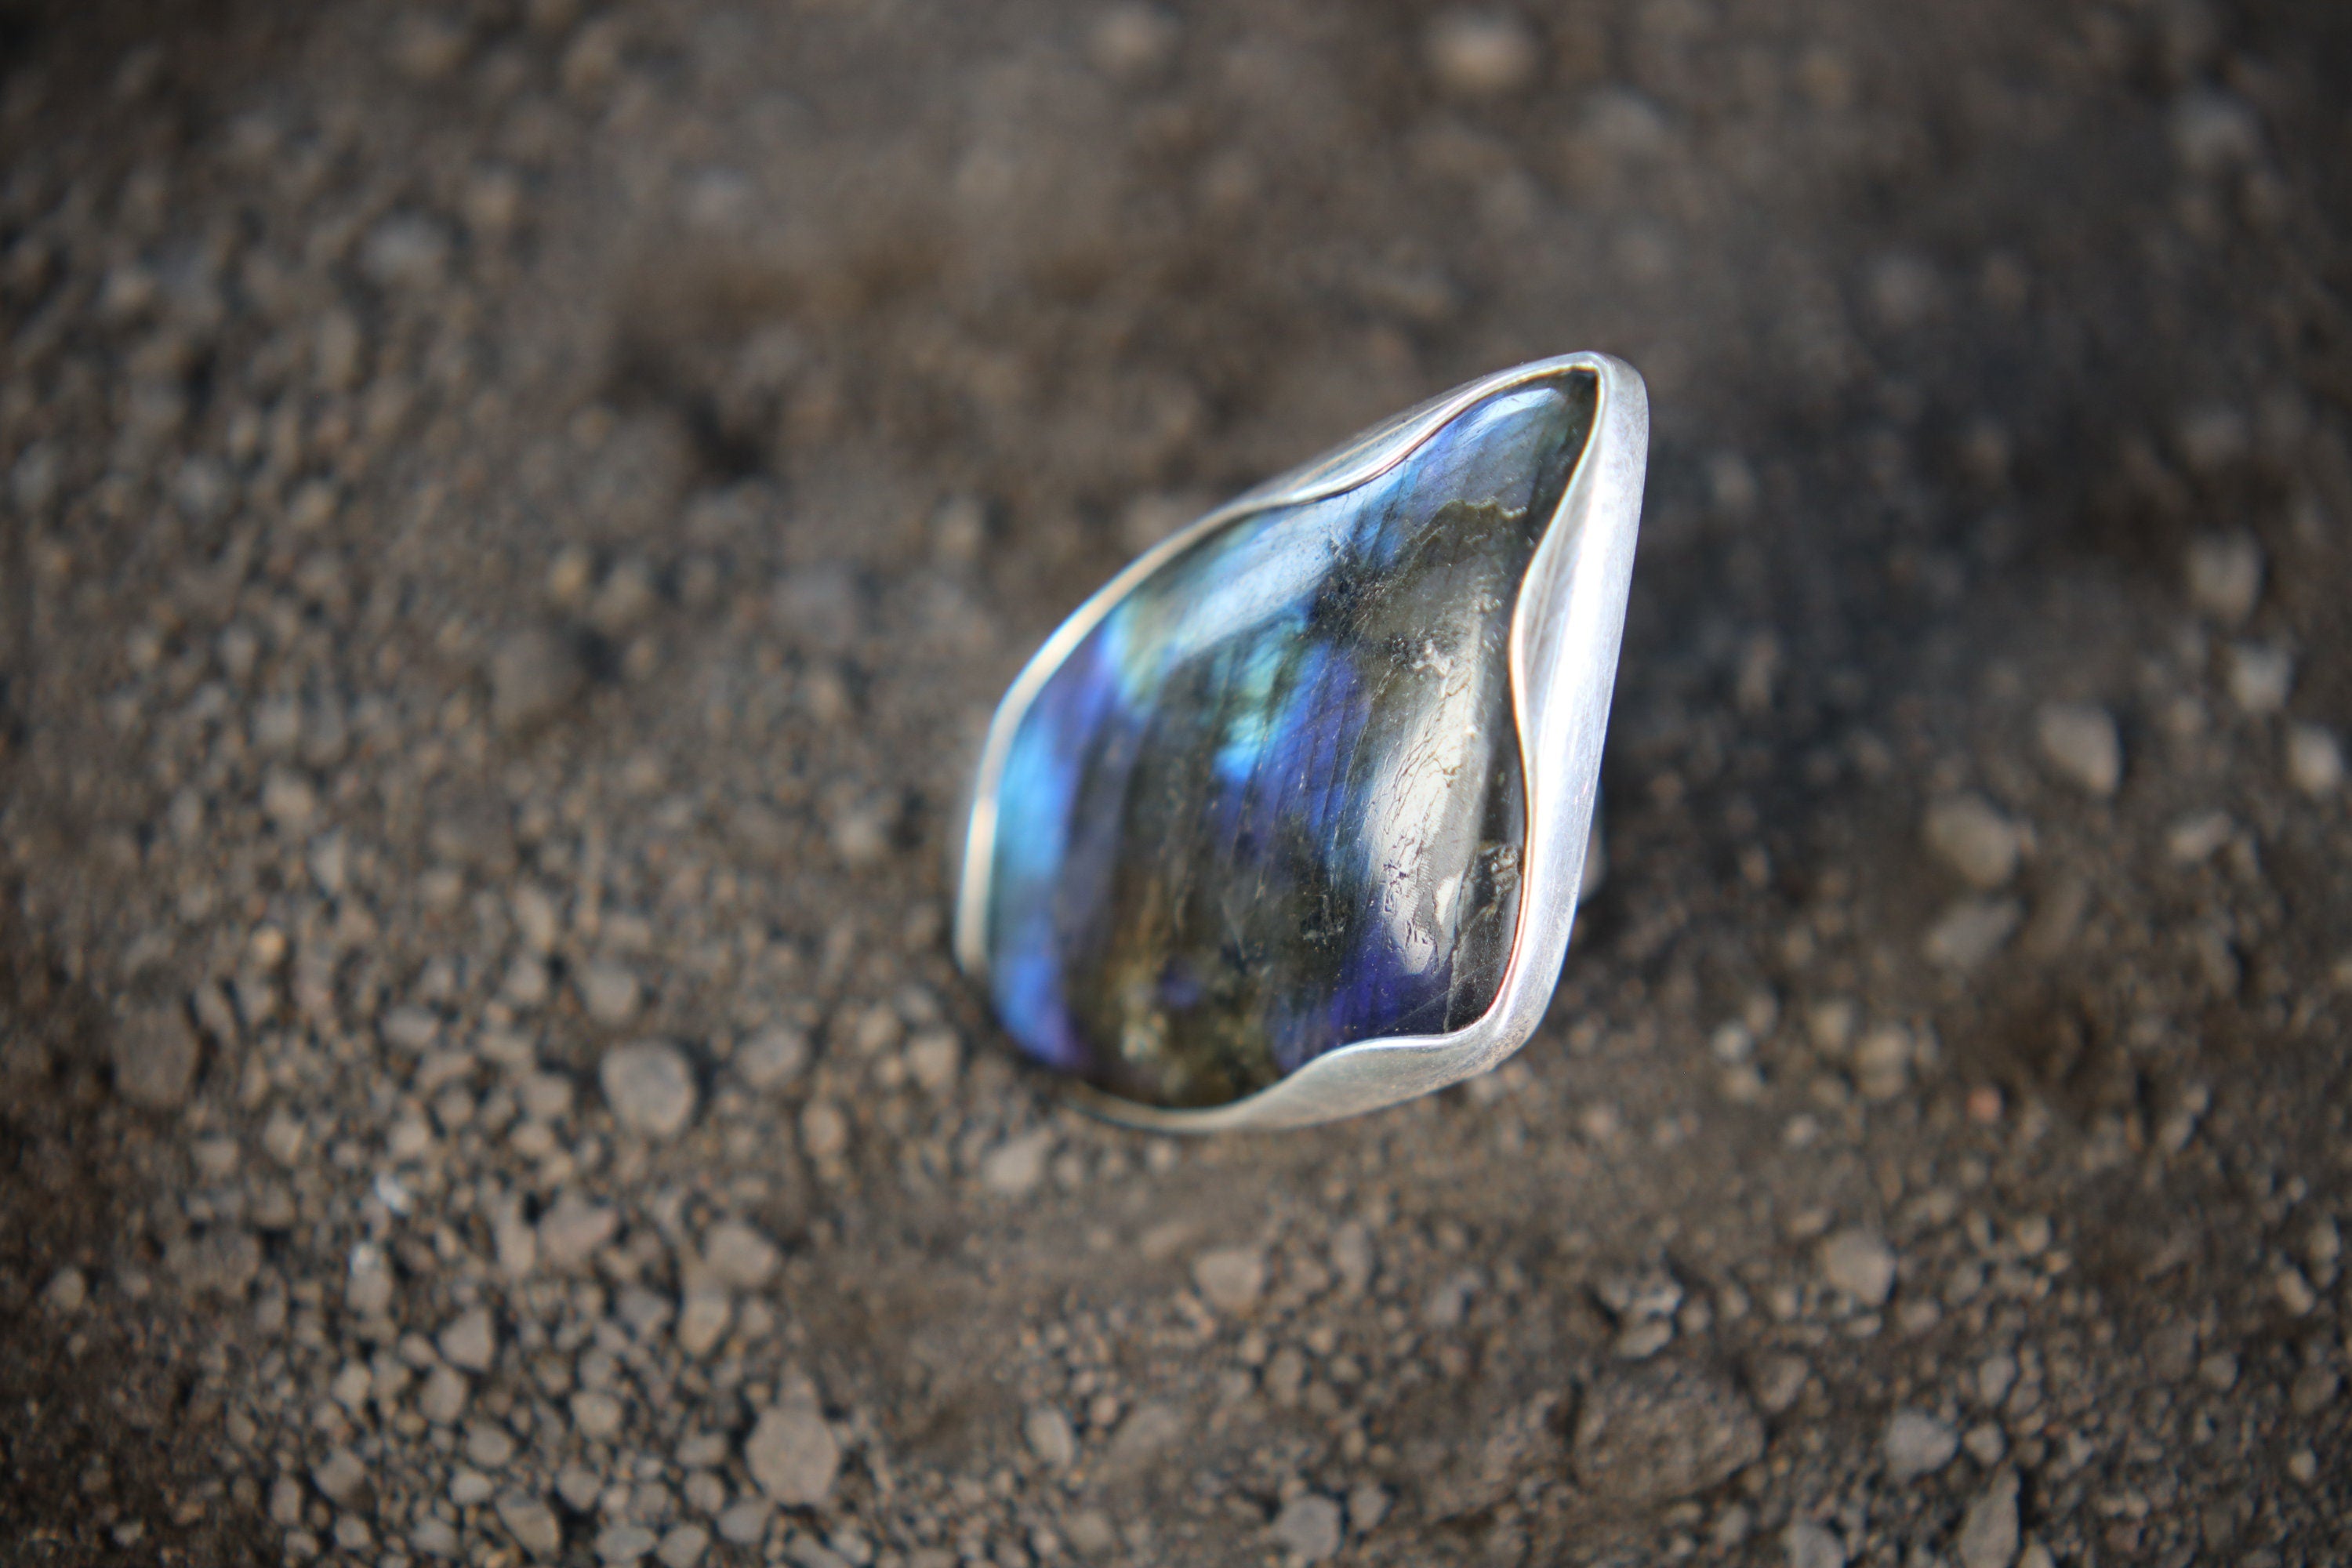 Sterling Silver Adjustable Ring Band, Large Tooth-Shaped Blue Labradorite, Size 5-12 US, Unisex, Spiritual Protection & Transformation